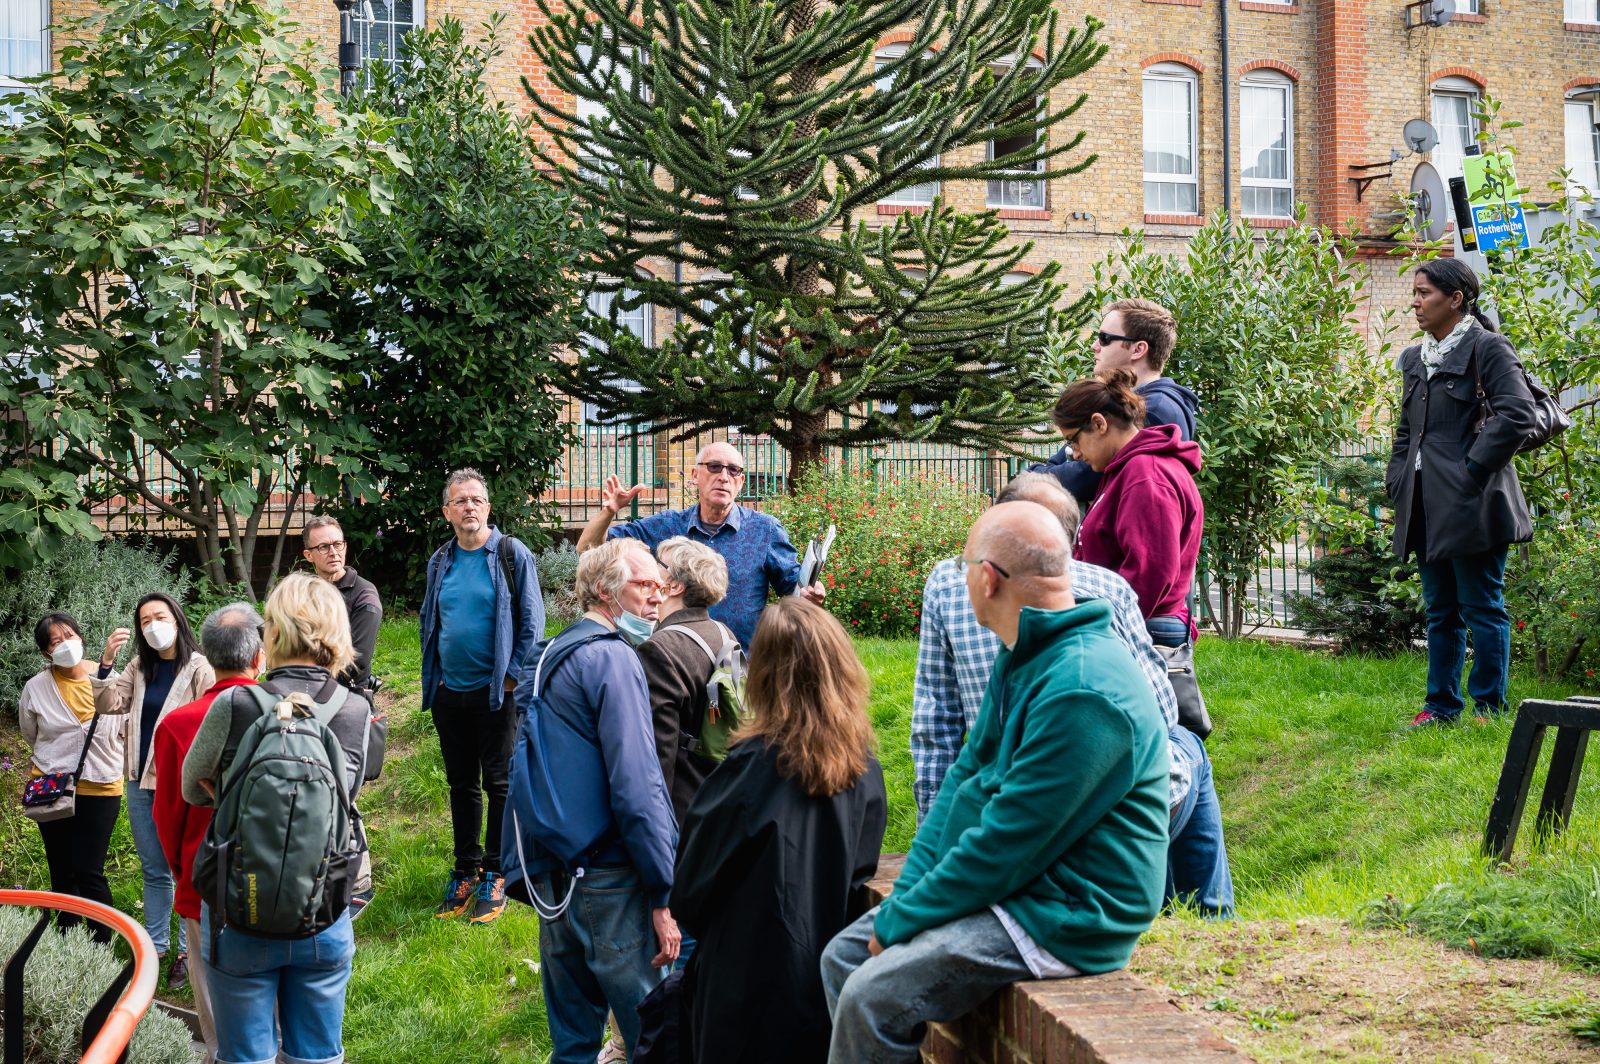 A volunteer, a man, talks to a group of people in the garden of the Brunel Museum. They are standing on a grassy bank. In the foreground, a man sits on a retaining wall.